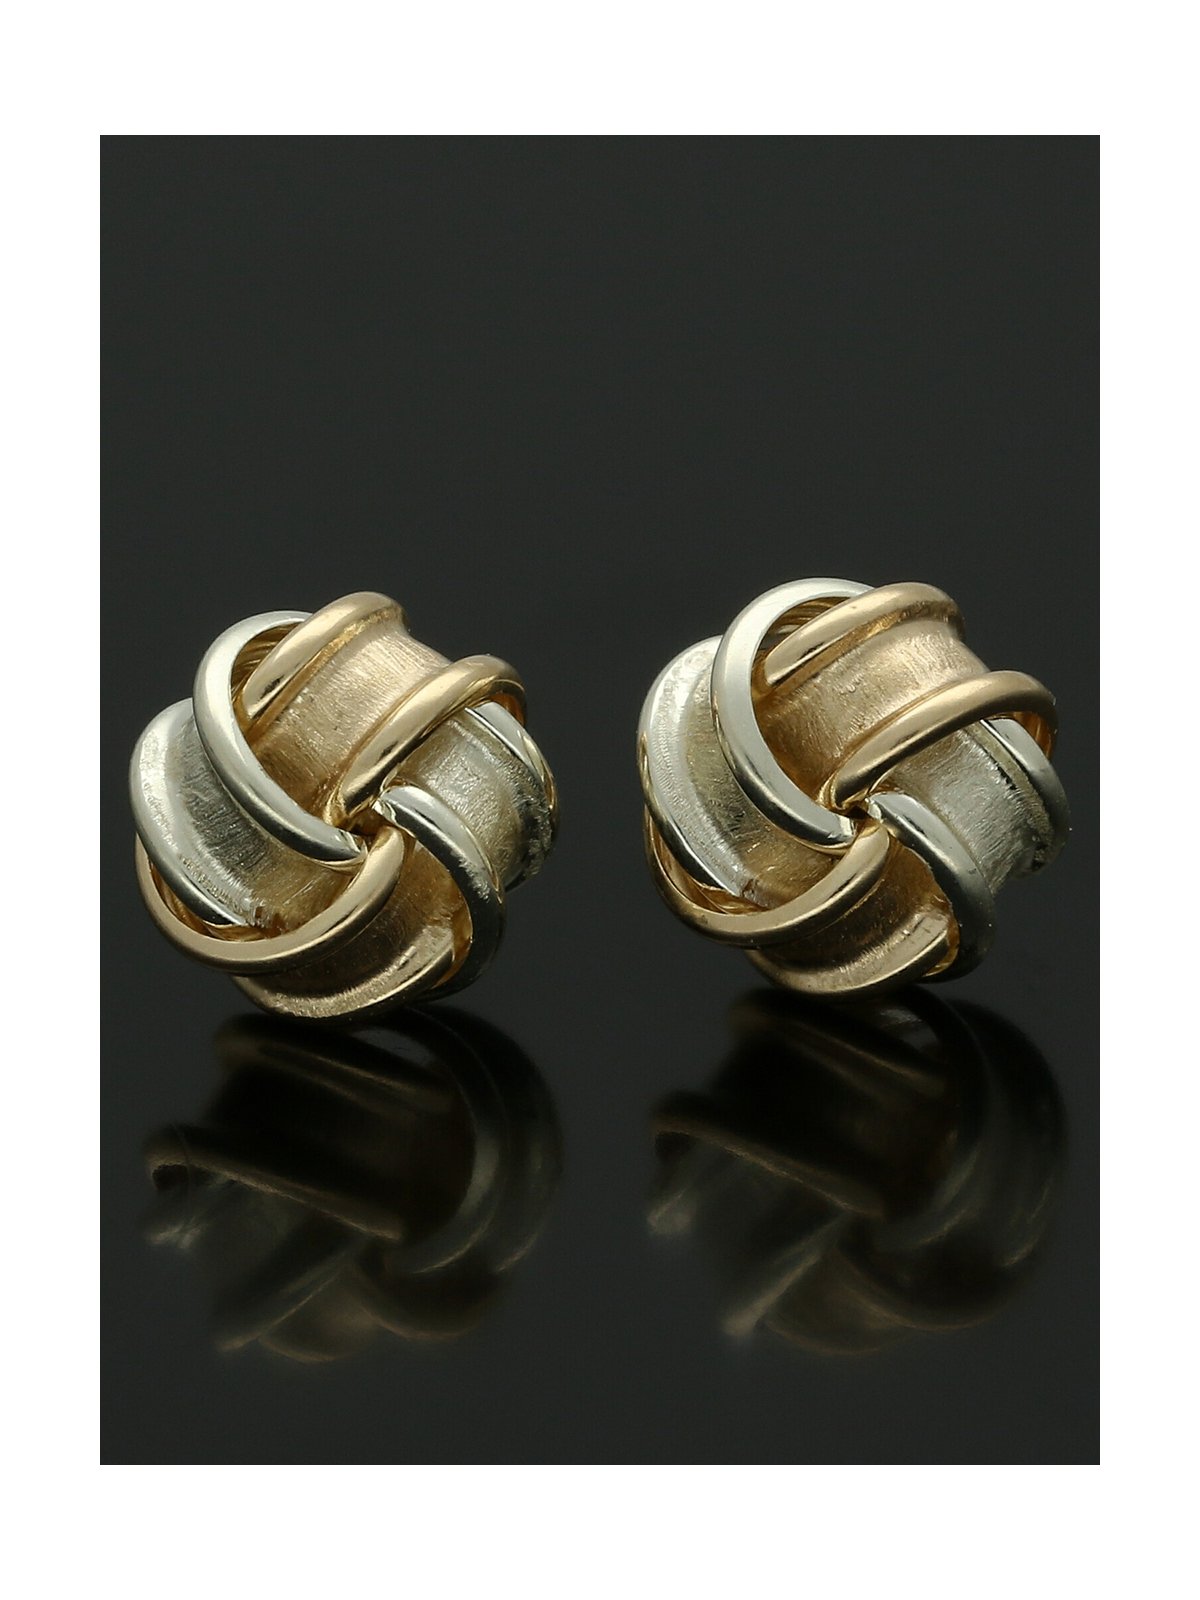 Frosted Knot Stud Earrings 7.5mm in 9ct Yellow and White Gold